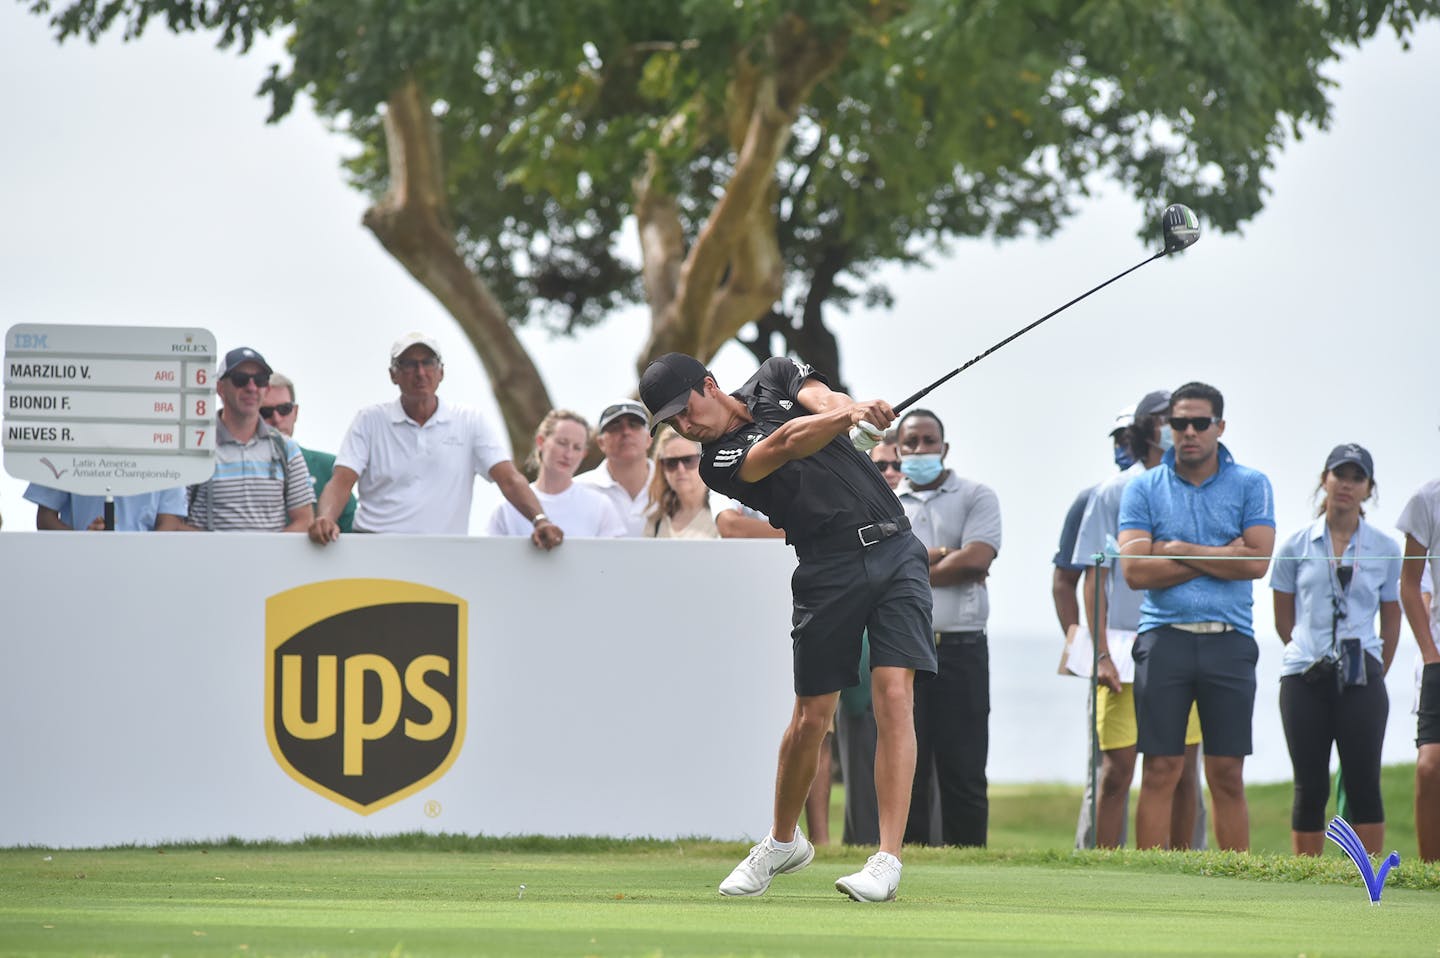 La Romana, DOMINICAN REPUBLIC: Fred Biondi of Brazil pictured at the 2022 Latin America Amateur Championship at Casa de Campo Resort during Final Round on January 23rd, 2022.